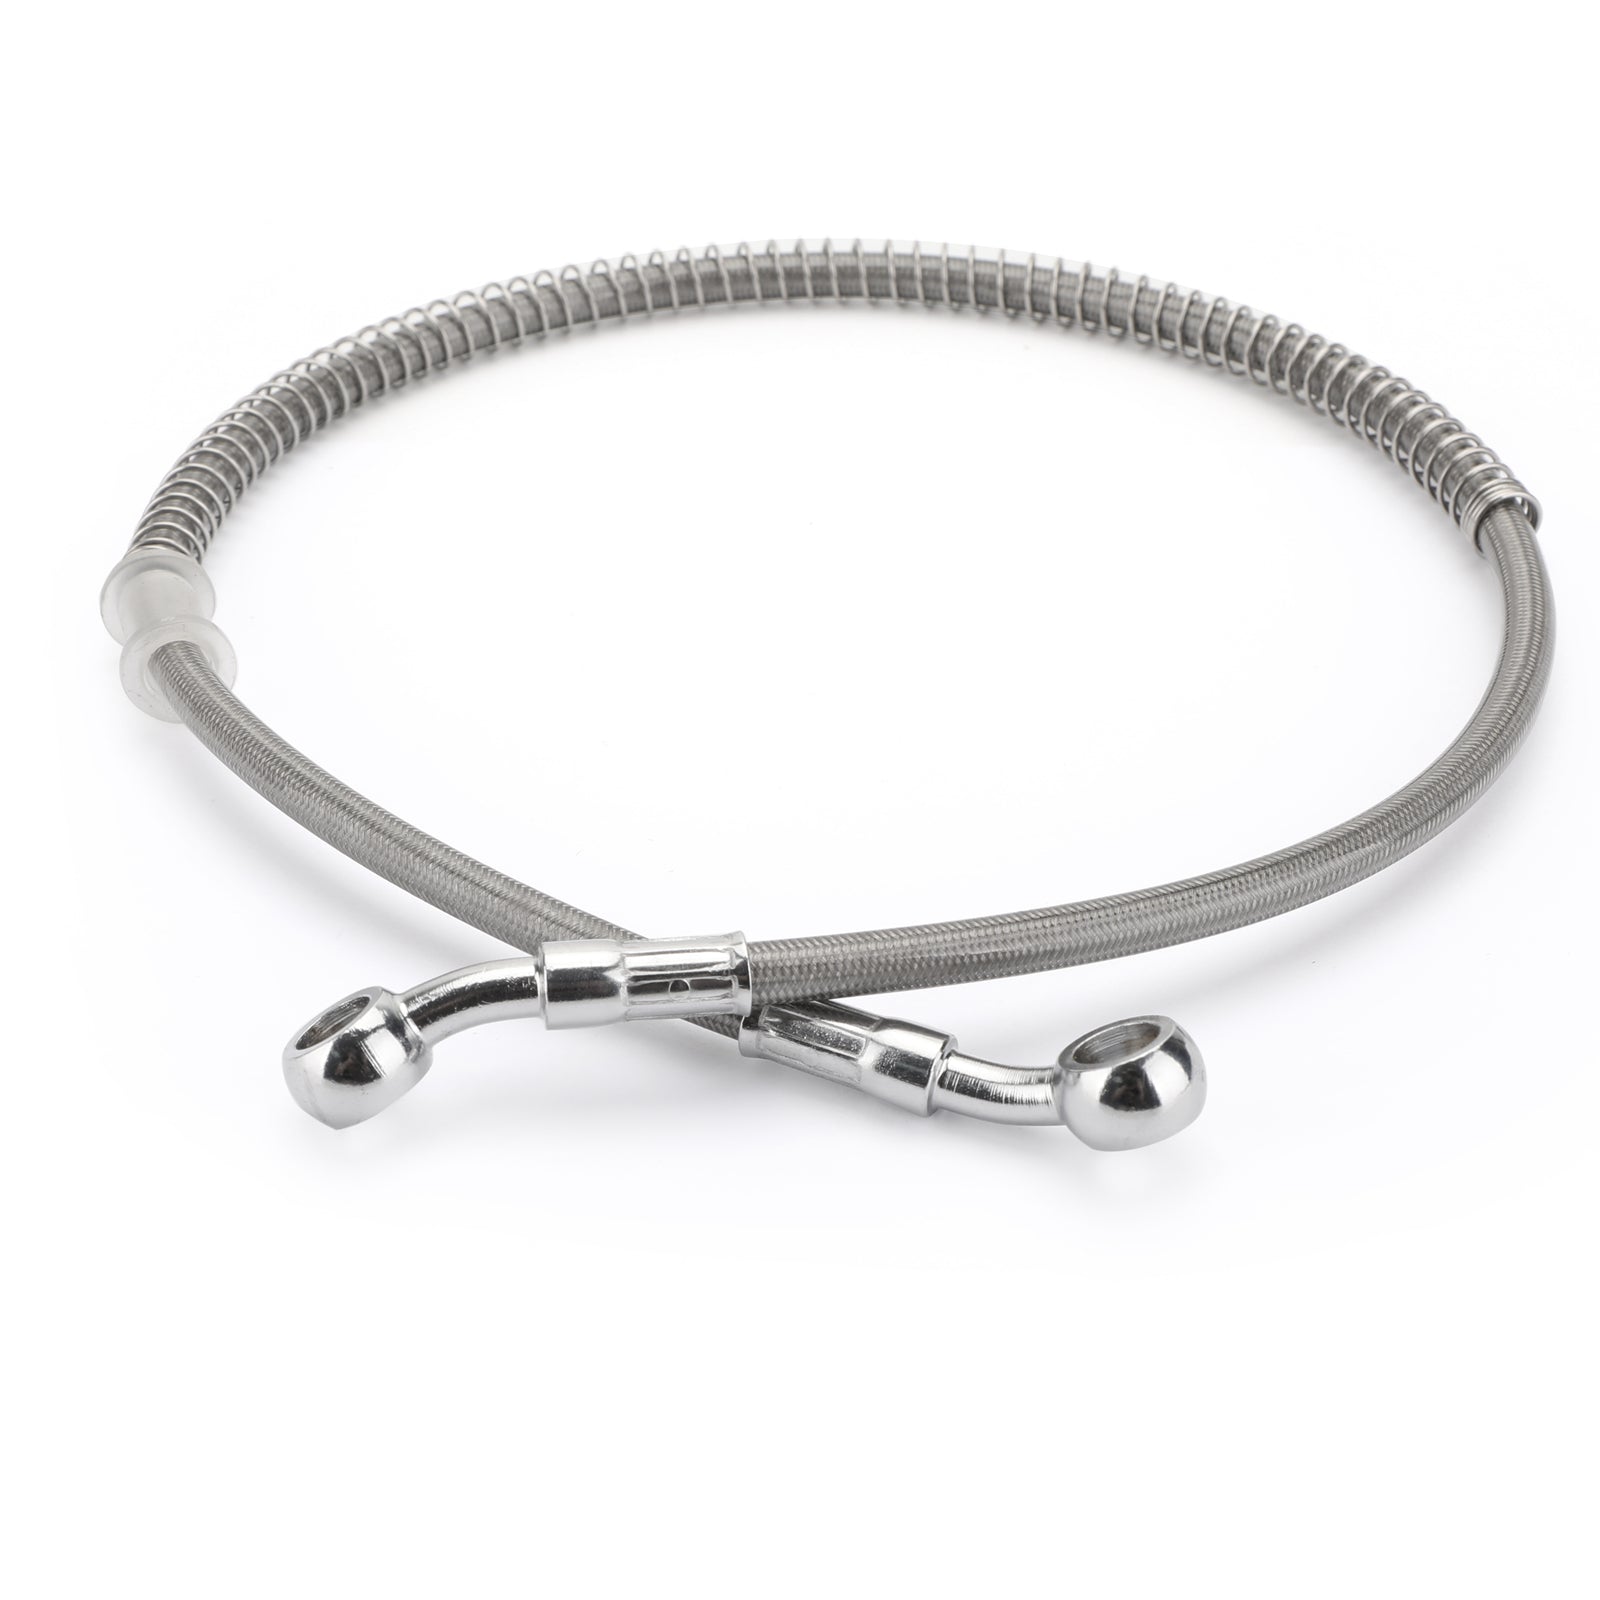 85cm/33inches Motorcycle Brake Oil Hose Line Banjo Fitting Stainless Steel Swivel End